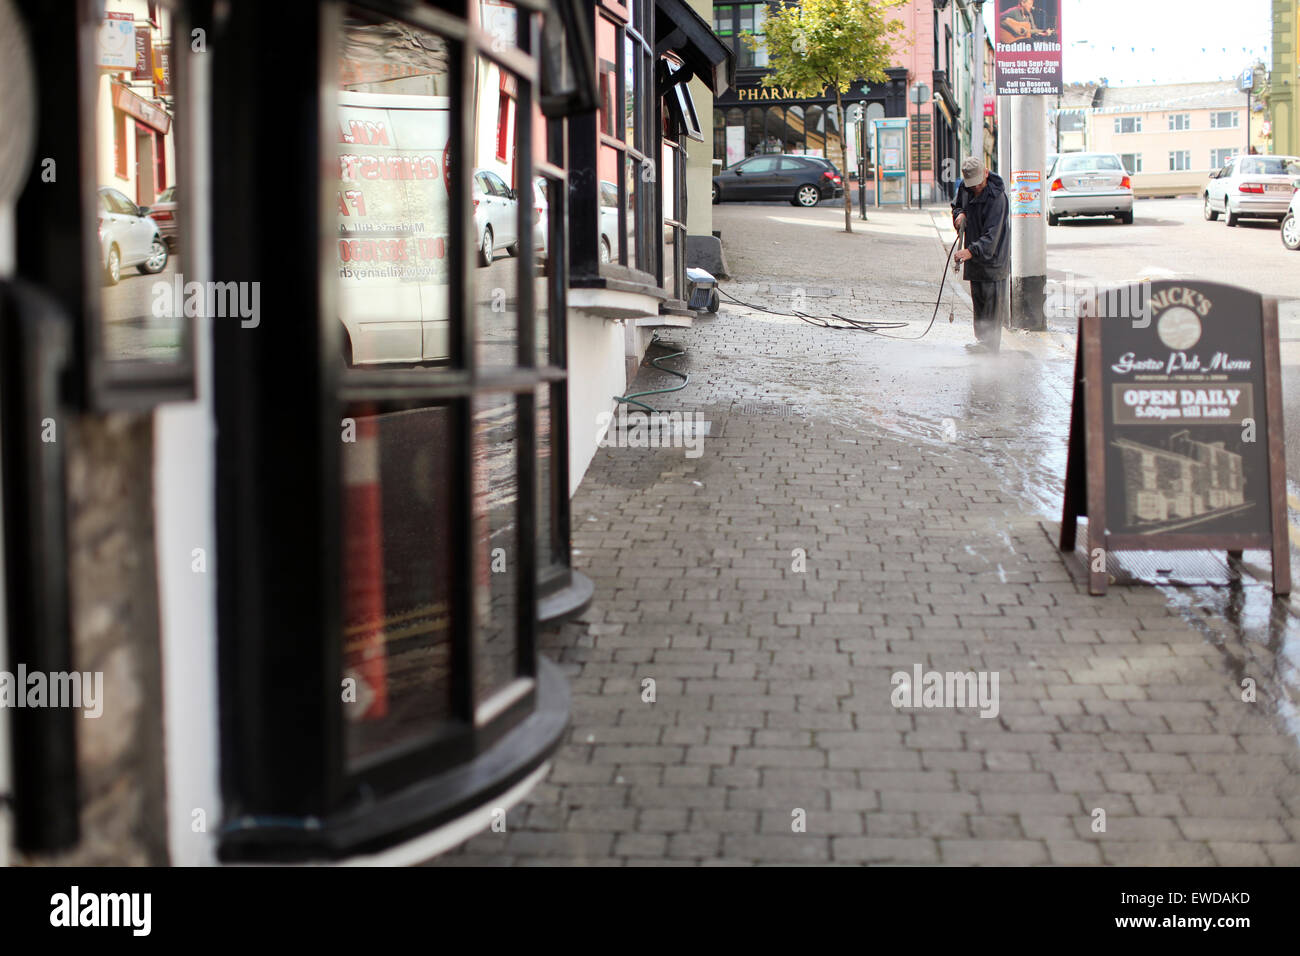 Man cleans the sidewalk in front of a pub in Ireland. Stock Photo